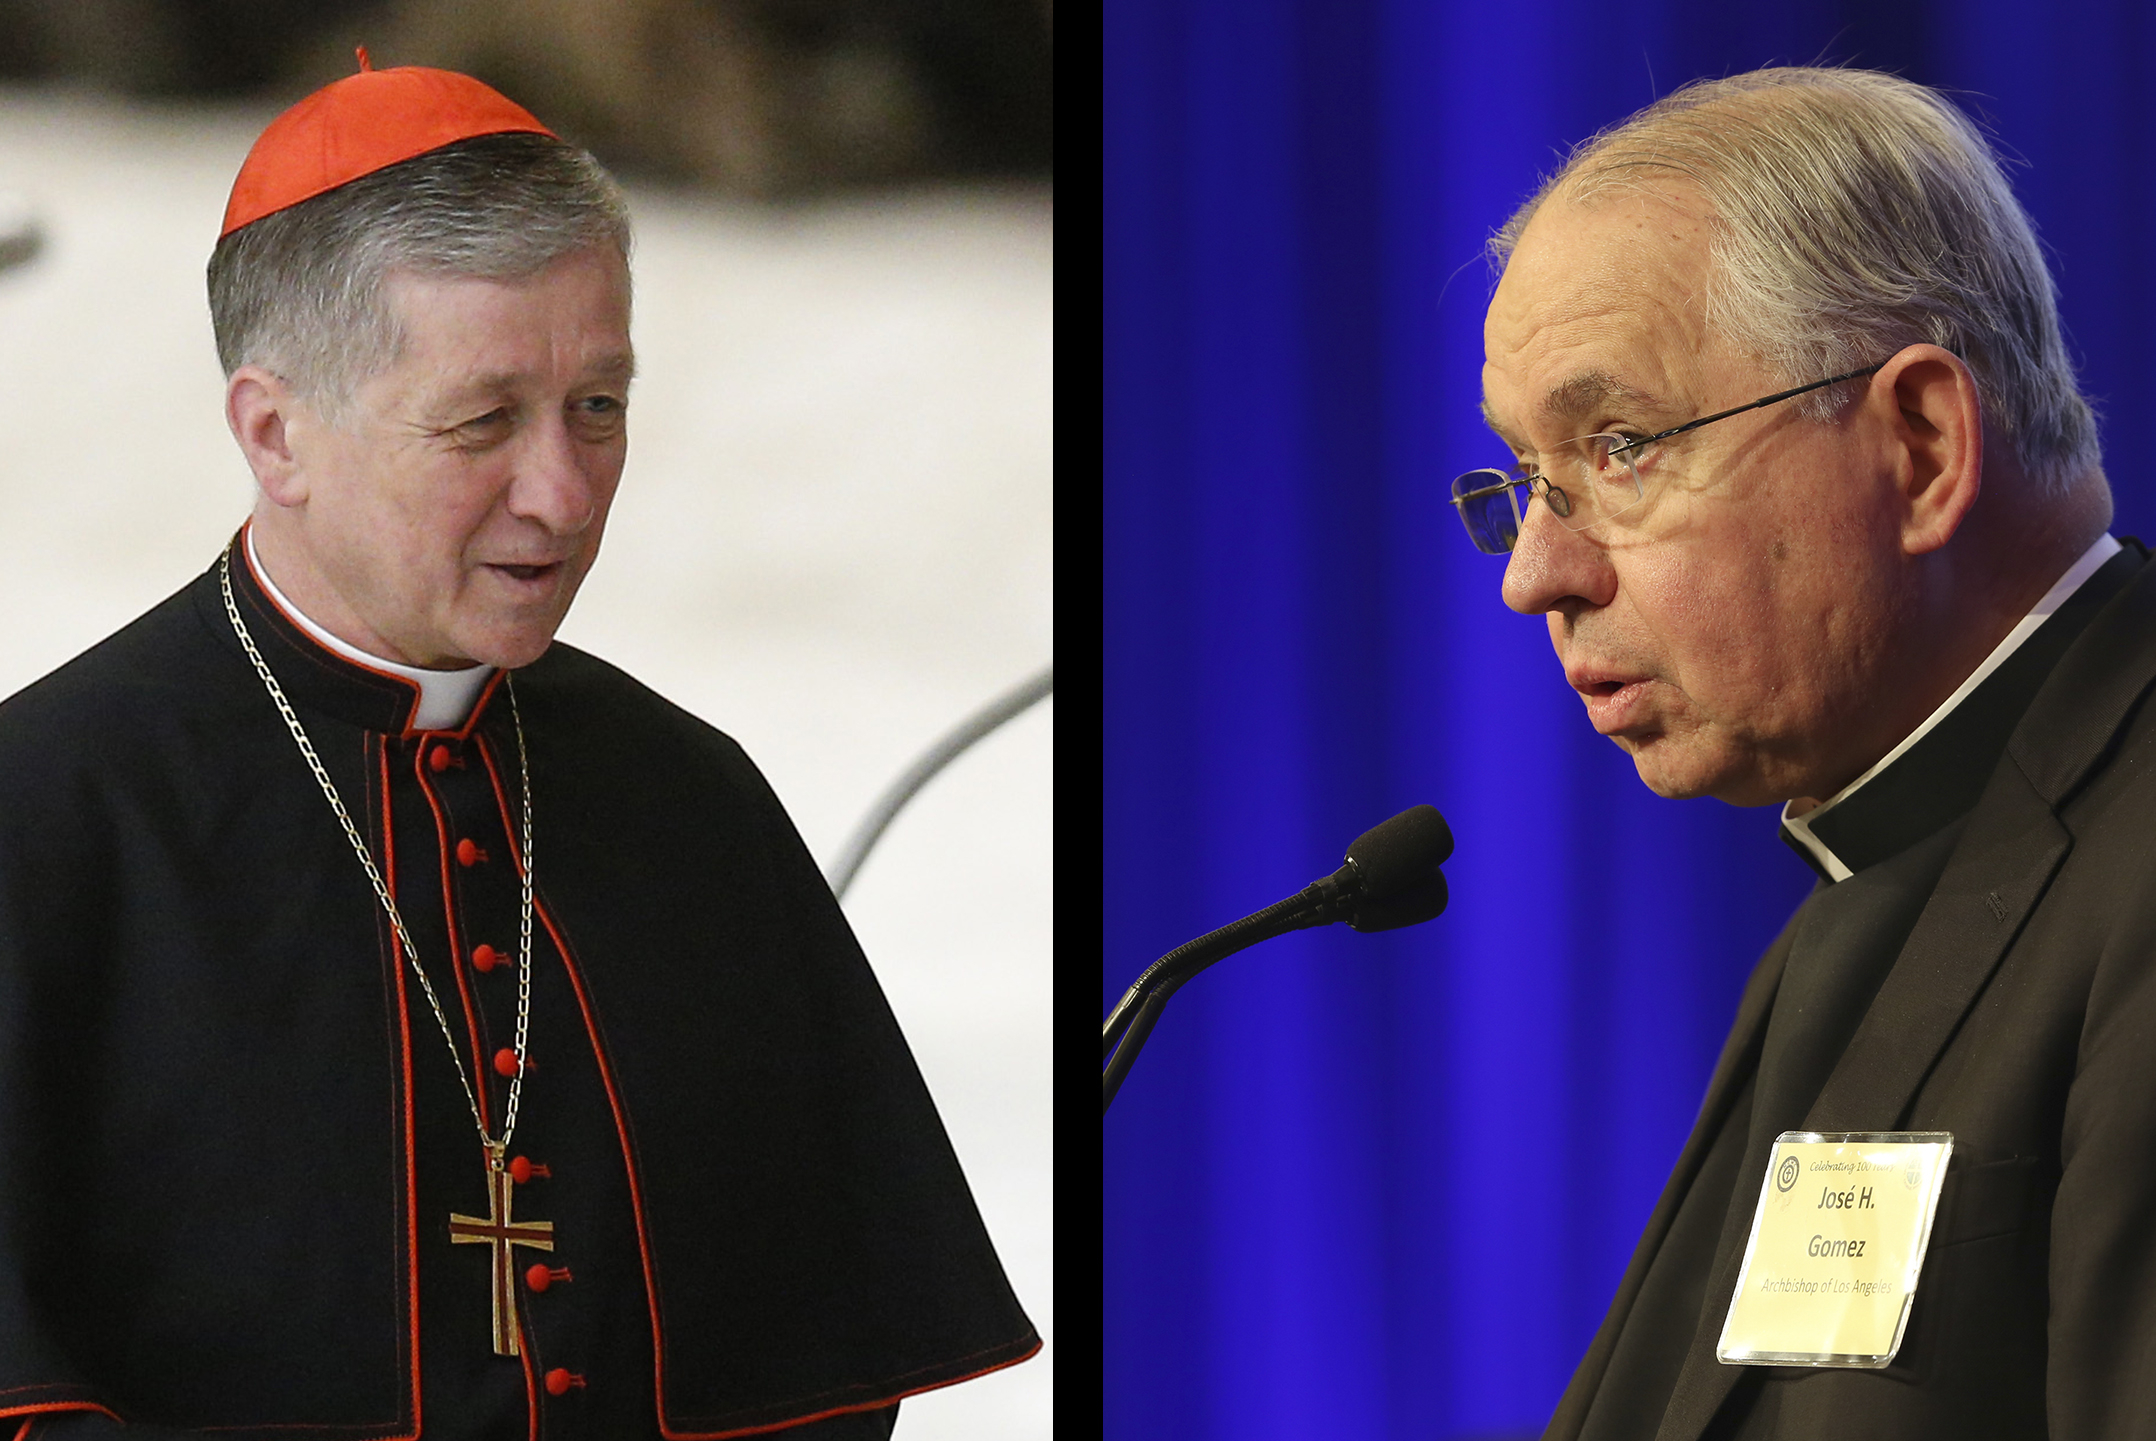 Cardinal Cupich and Archbishop Gomez to headline conference on overcoming division | America Magazine